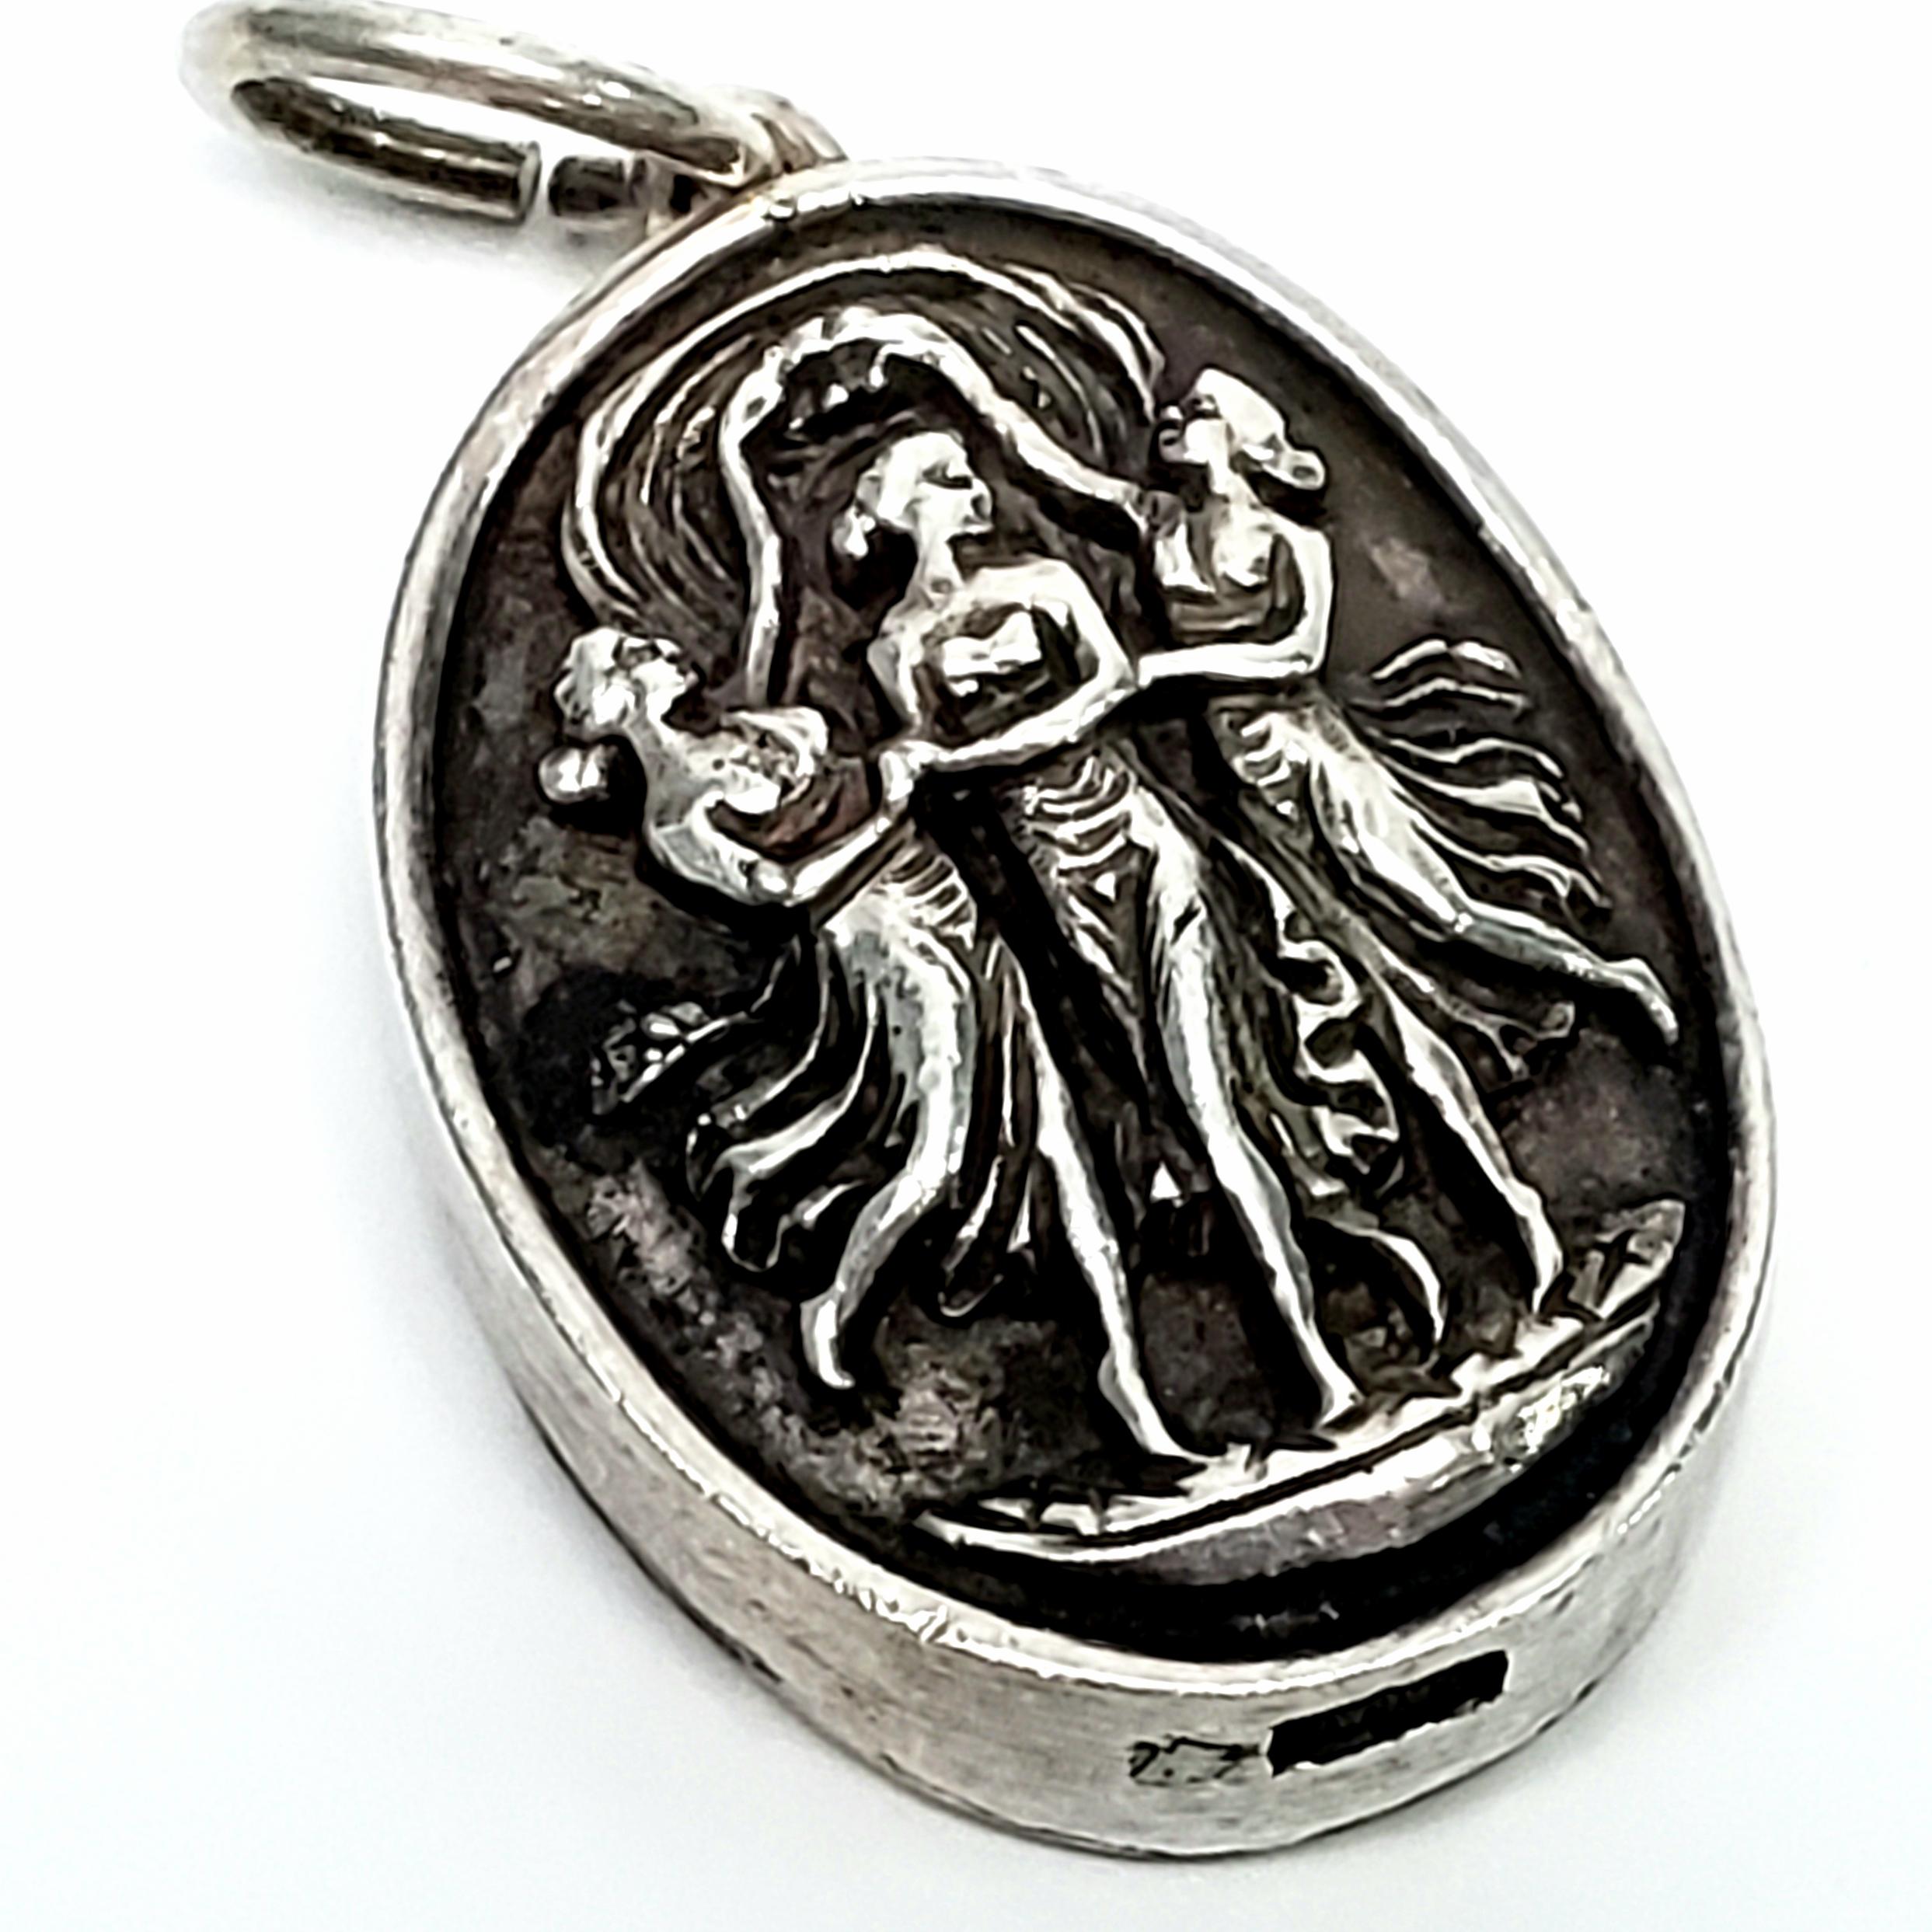 Vintage sterling silver pendant by Henryk Winograd featuring 3 ladies dancing.

Henryk Winograd was a leader in America in the art of Repousse. He used sheets of fine silver and hand crafted sharp, high relief designs. His work is highly